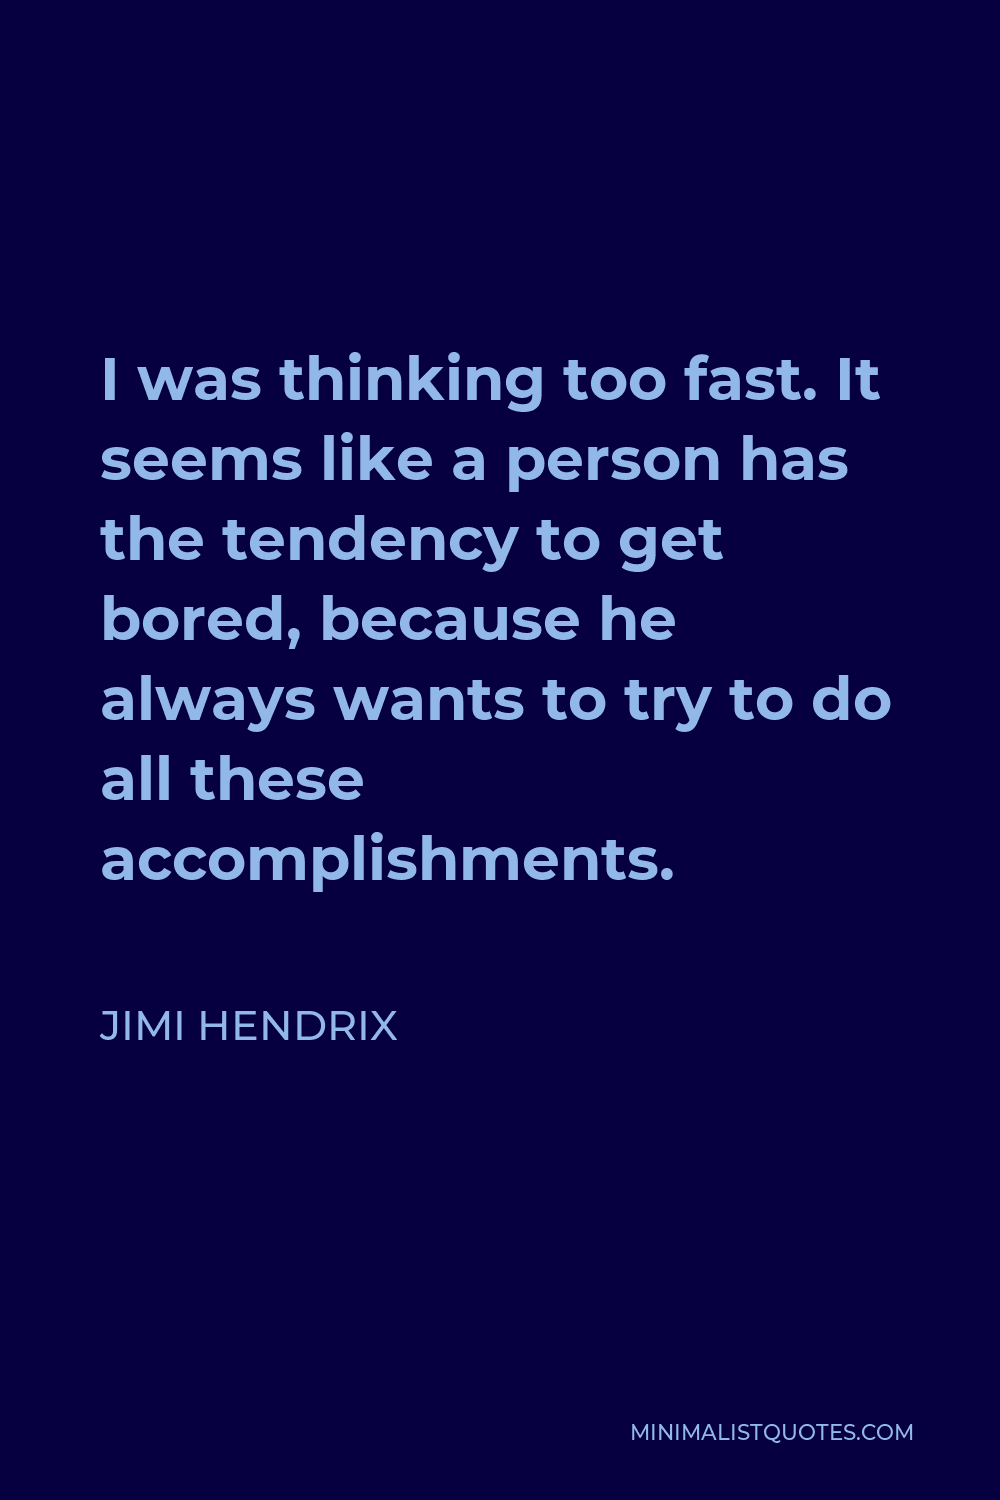 Jimi Hendrix Quote - I was thinking too fast. It seems like a person has the tendency to get bored, because he always wants to try to do all these accomplishments.